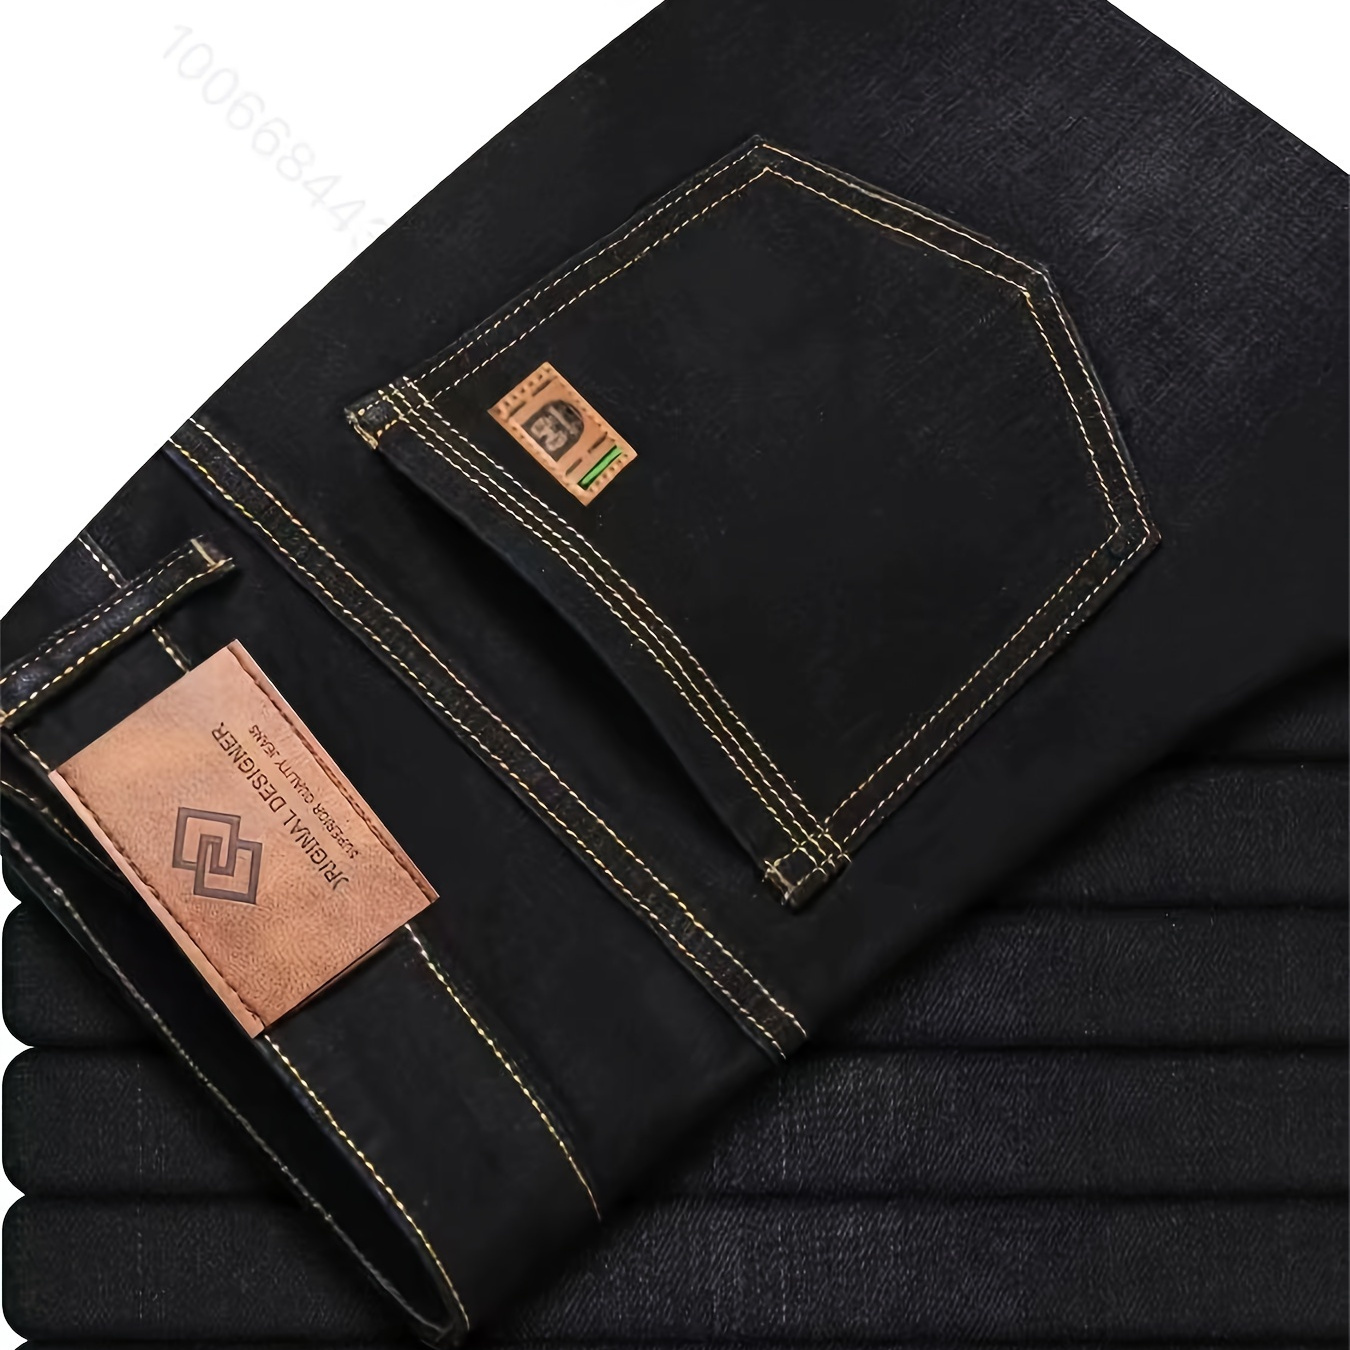 

Men's Solid Washed Denim Trousers With Pockets, Causal Cotton Blend Jeans For Outdoor Activities